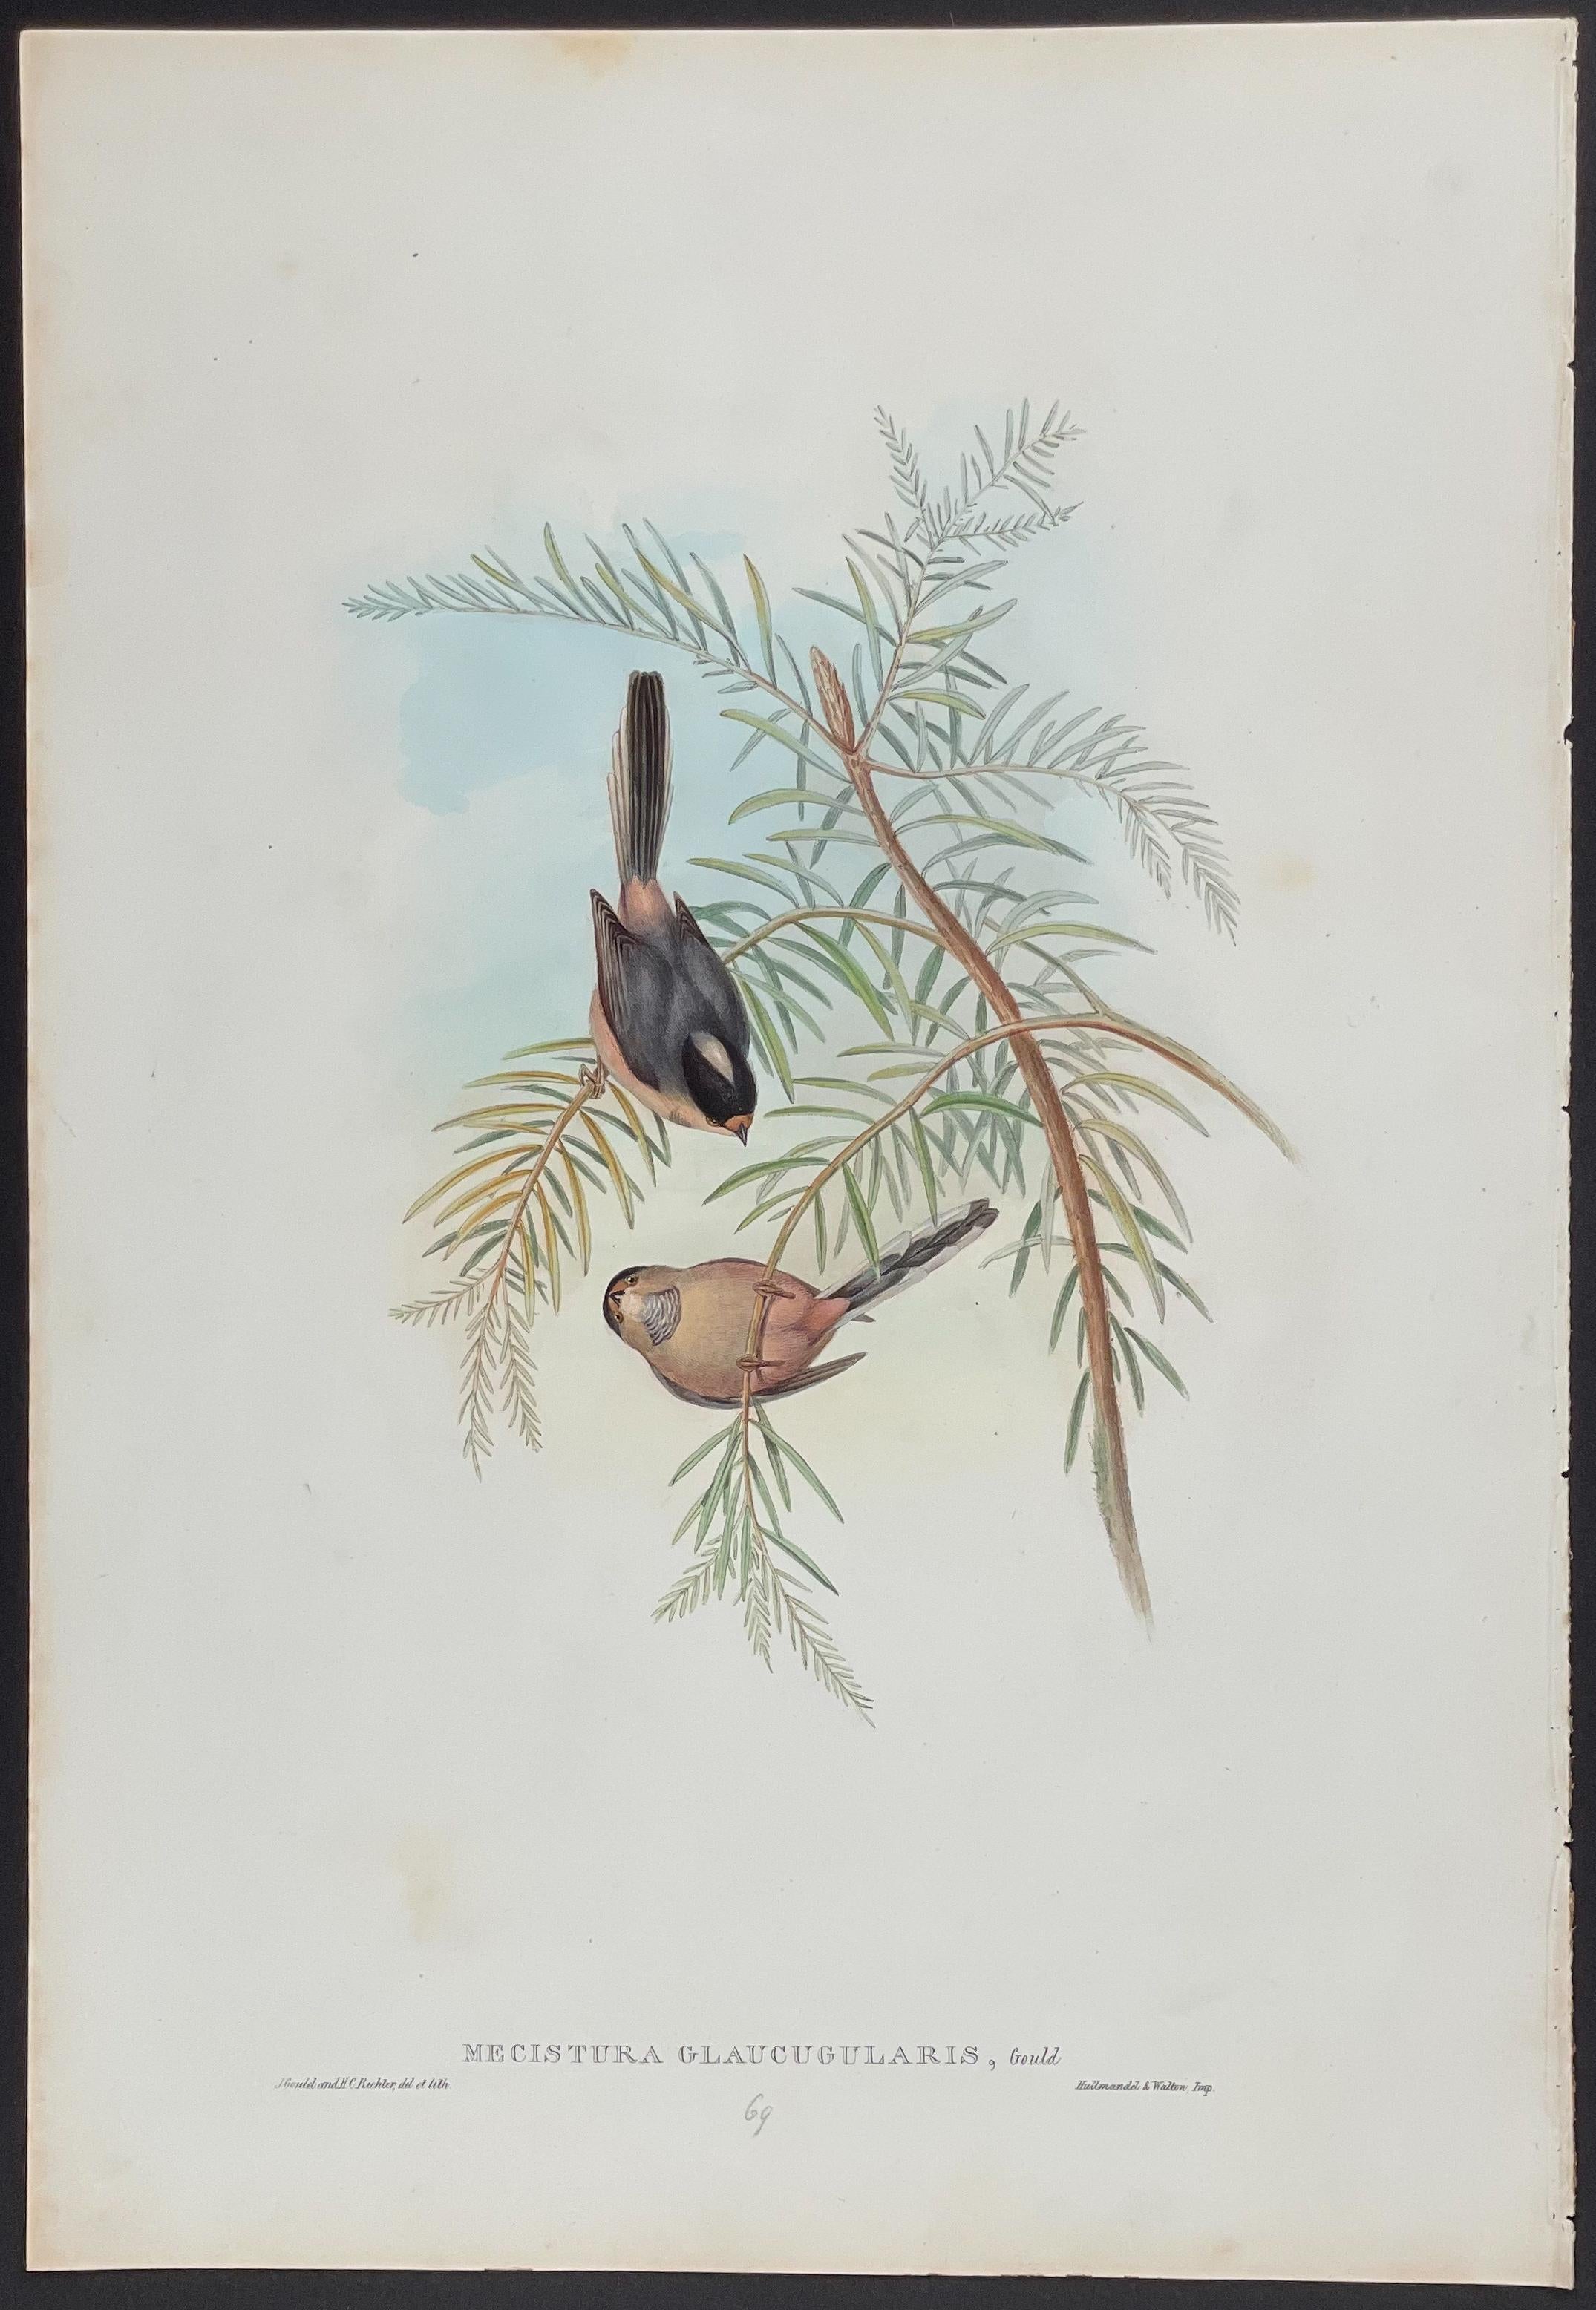 John Gould - Silvery-throated Tit  from 'The Birds of Asia' C. 1850